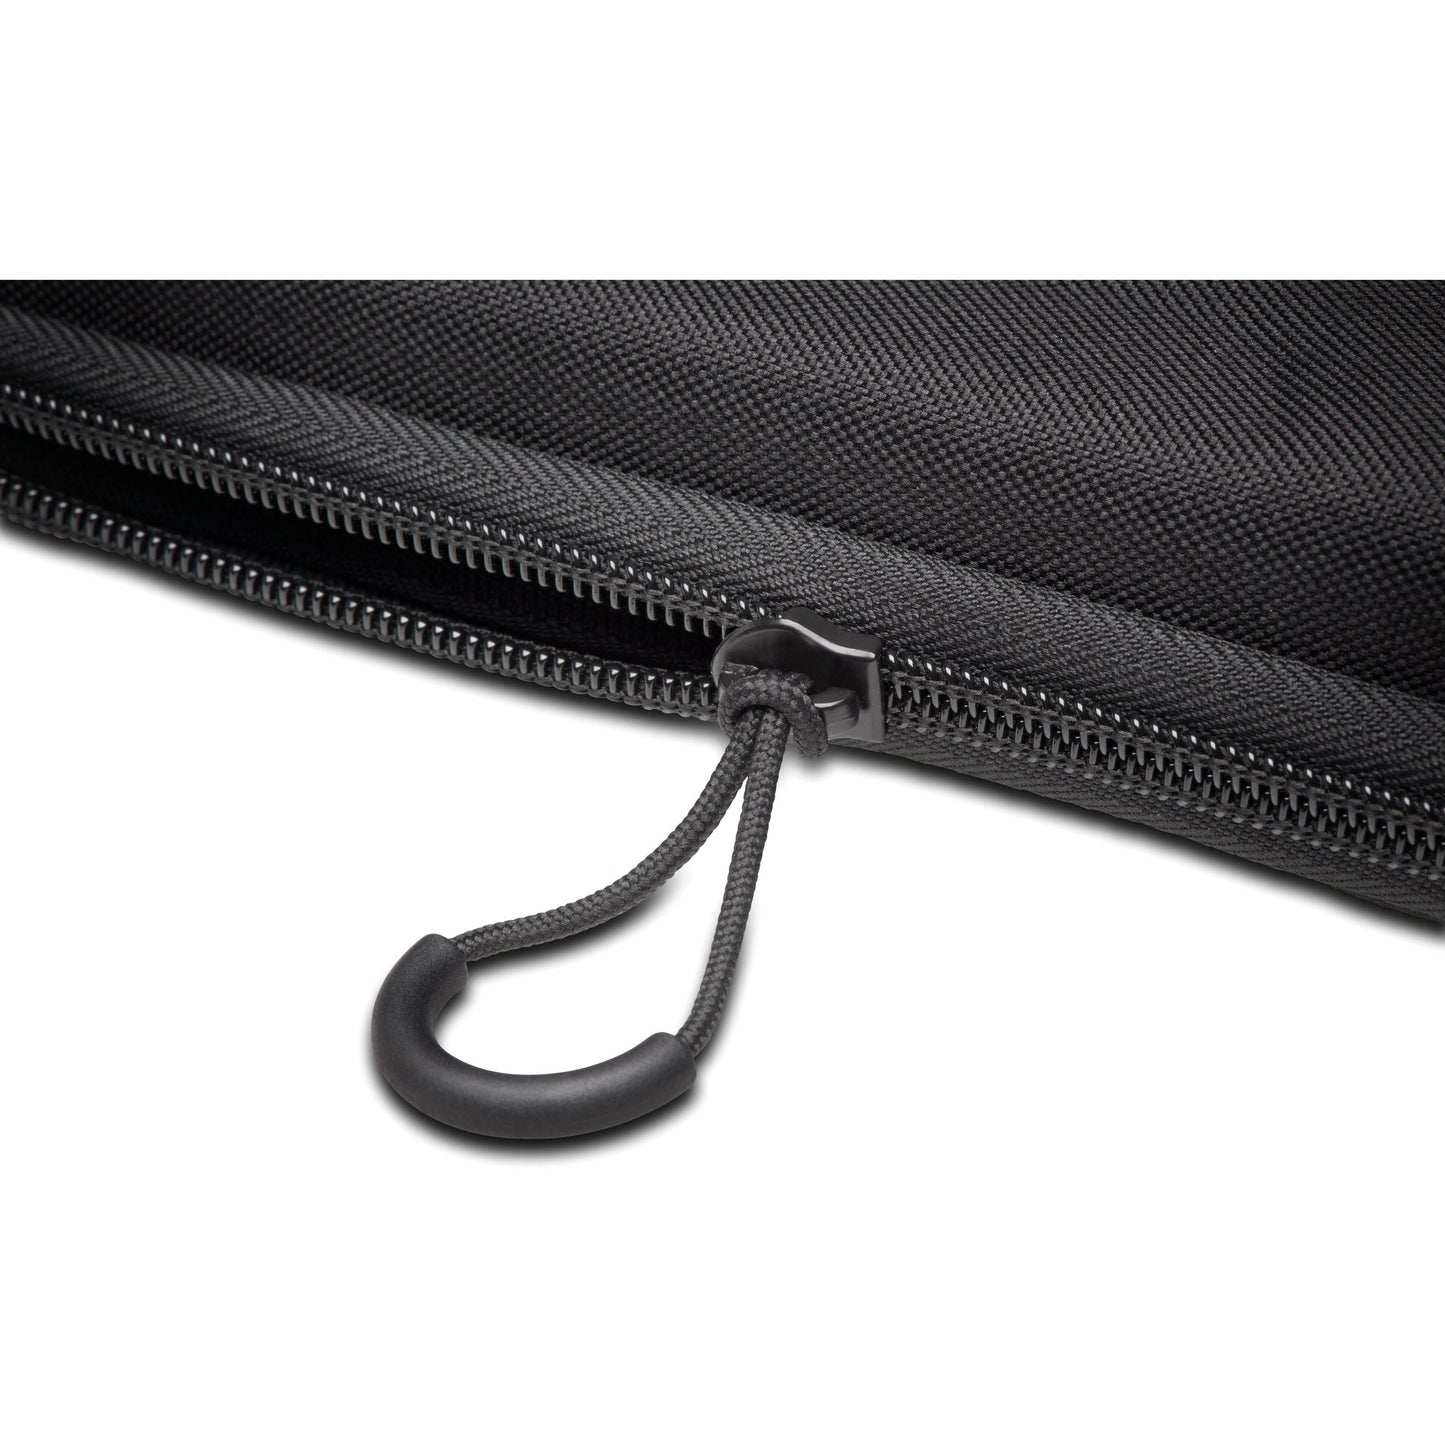 Kensington Stay-on LS520 Carrying Case for 11.6" Notebook Chromebook - Black